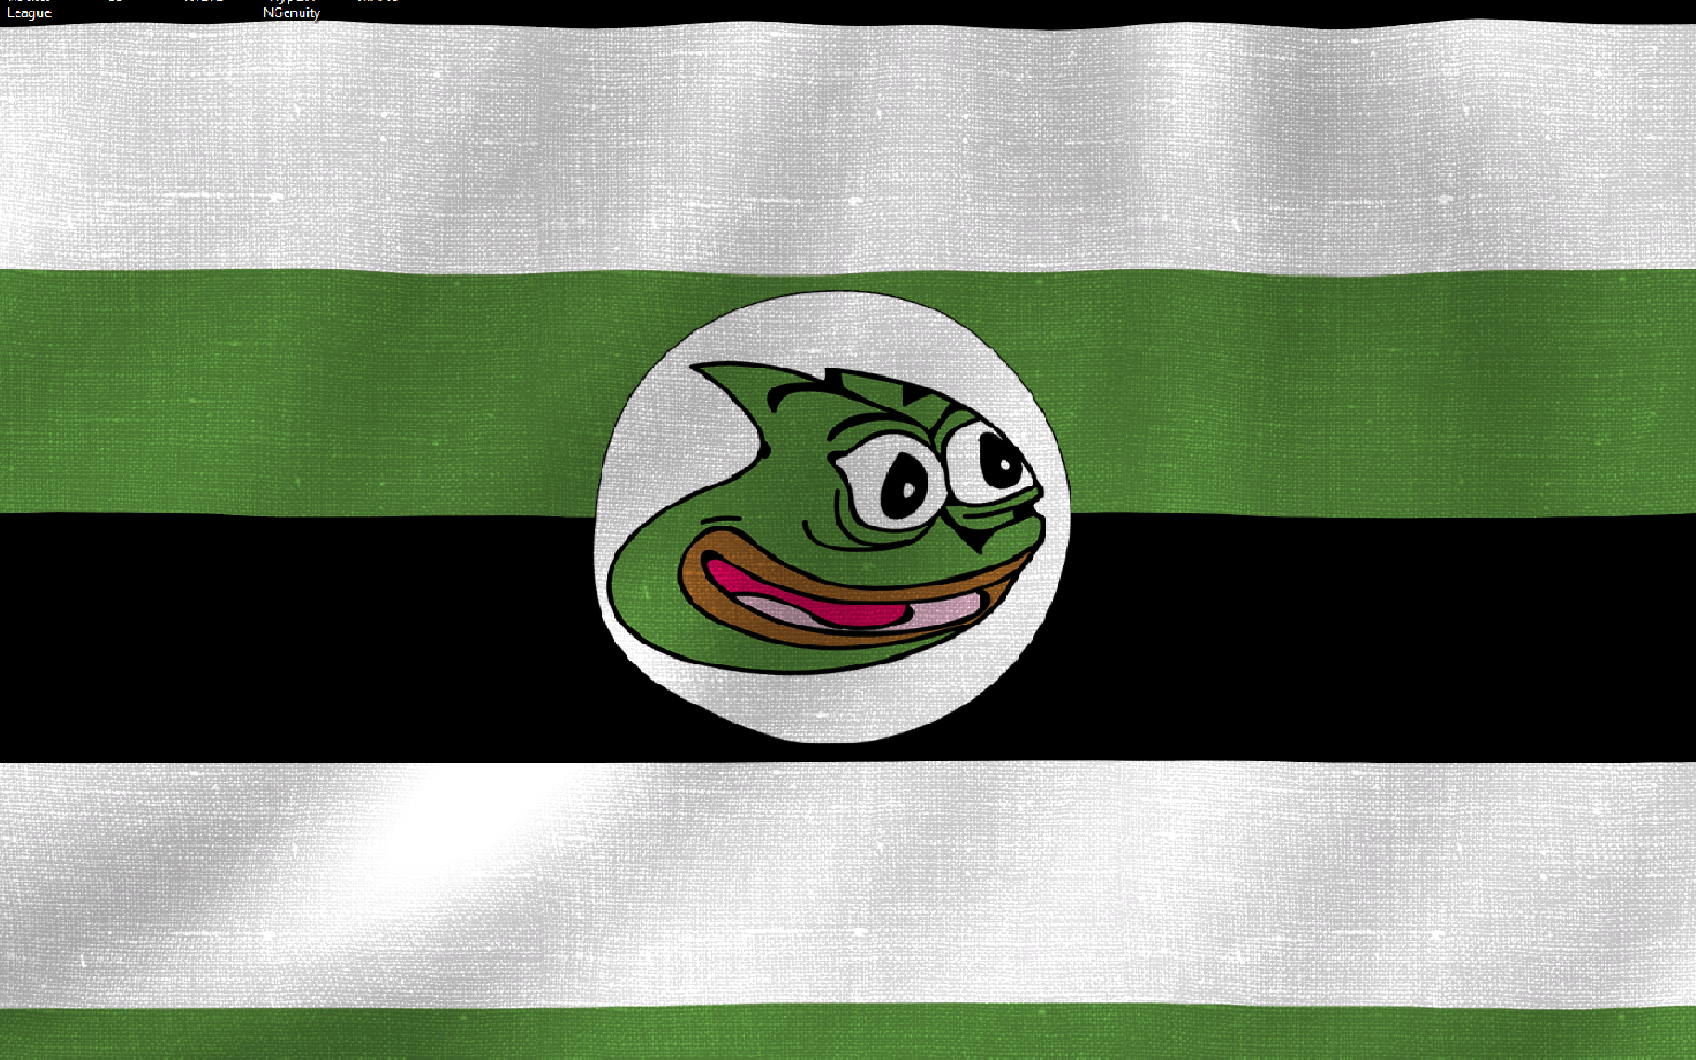 Maybe ask FOR SAAAN to change wallpaper to Pepega flag?